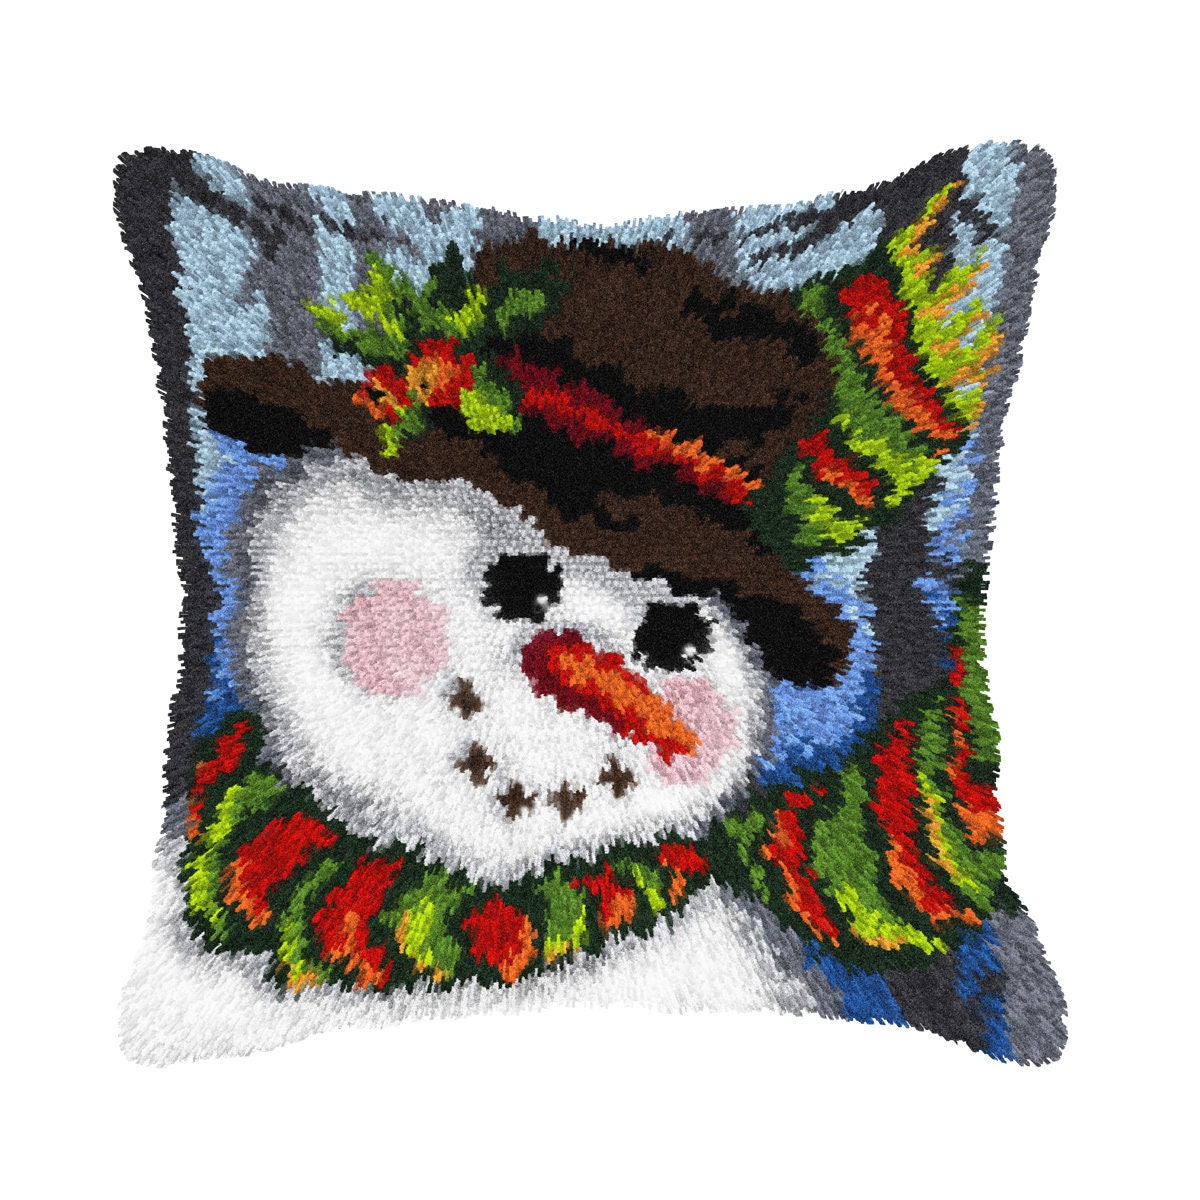 KINGLELE Latch Hook Pillow Kit for Kids Adults DIY Throw Pillow Cover Needlework Cross Stitch Kits Printed Canvas Owl Pattern Sofa Decor 17 inch x